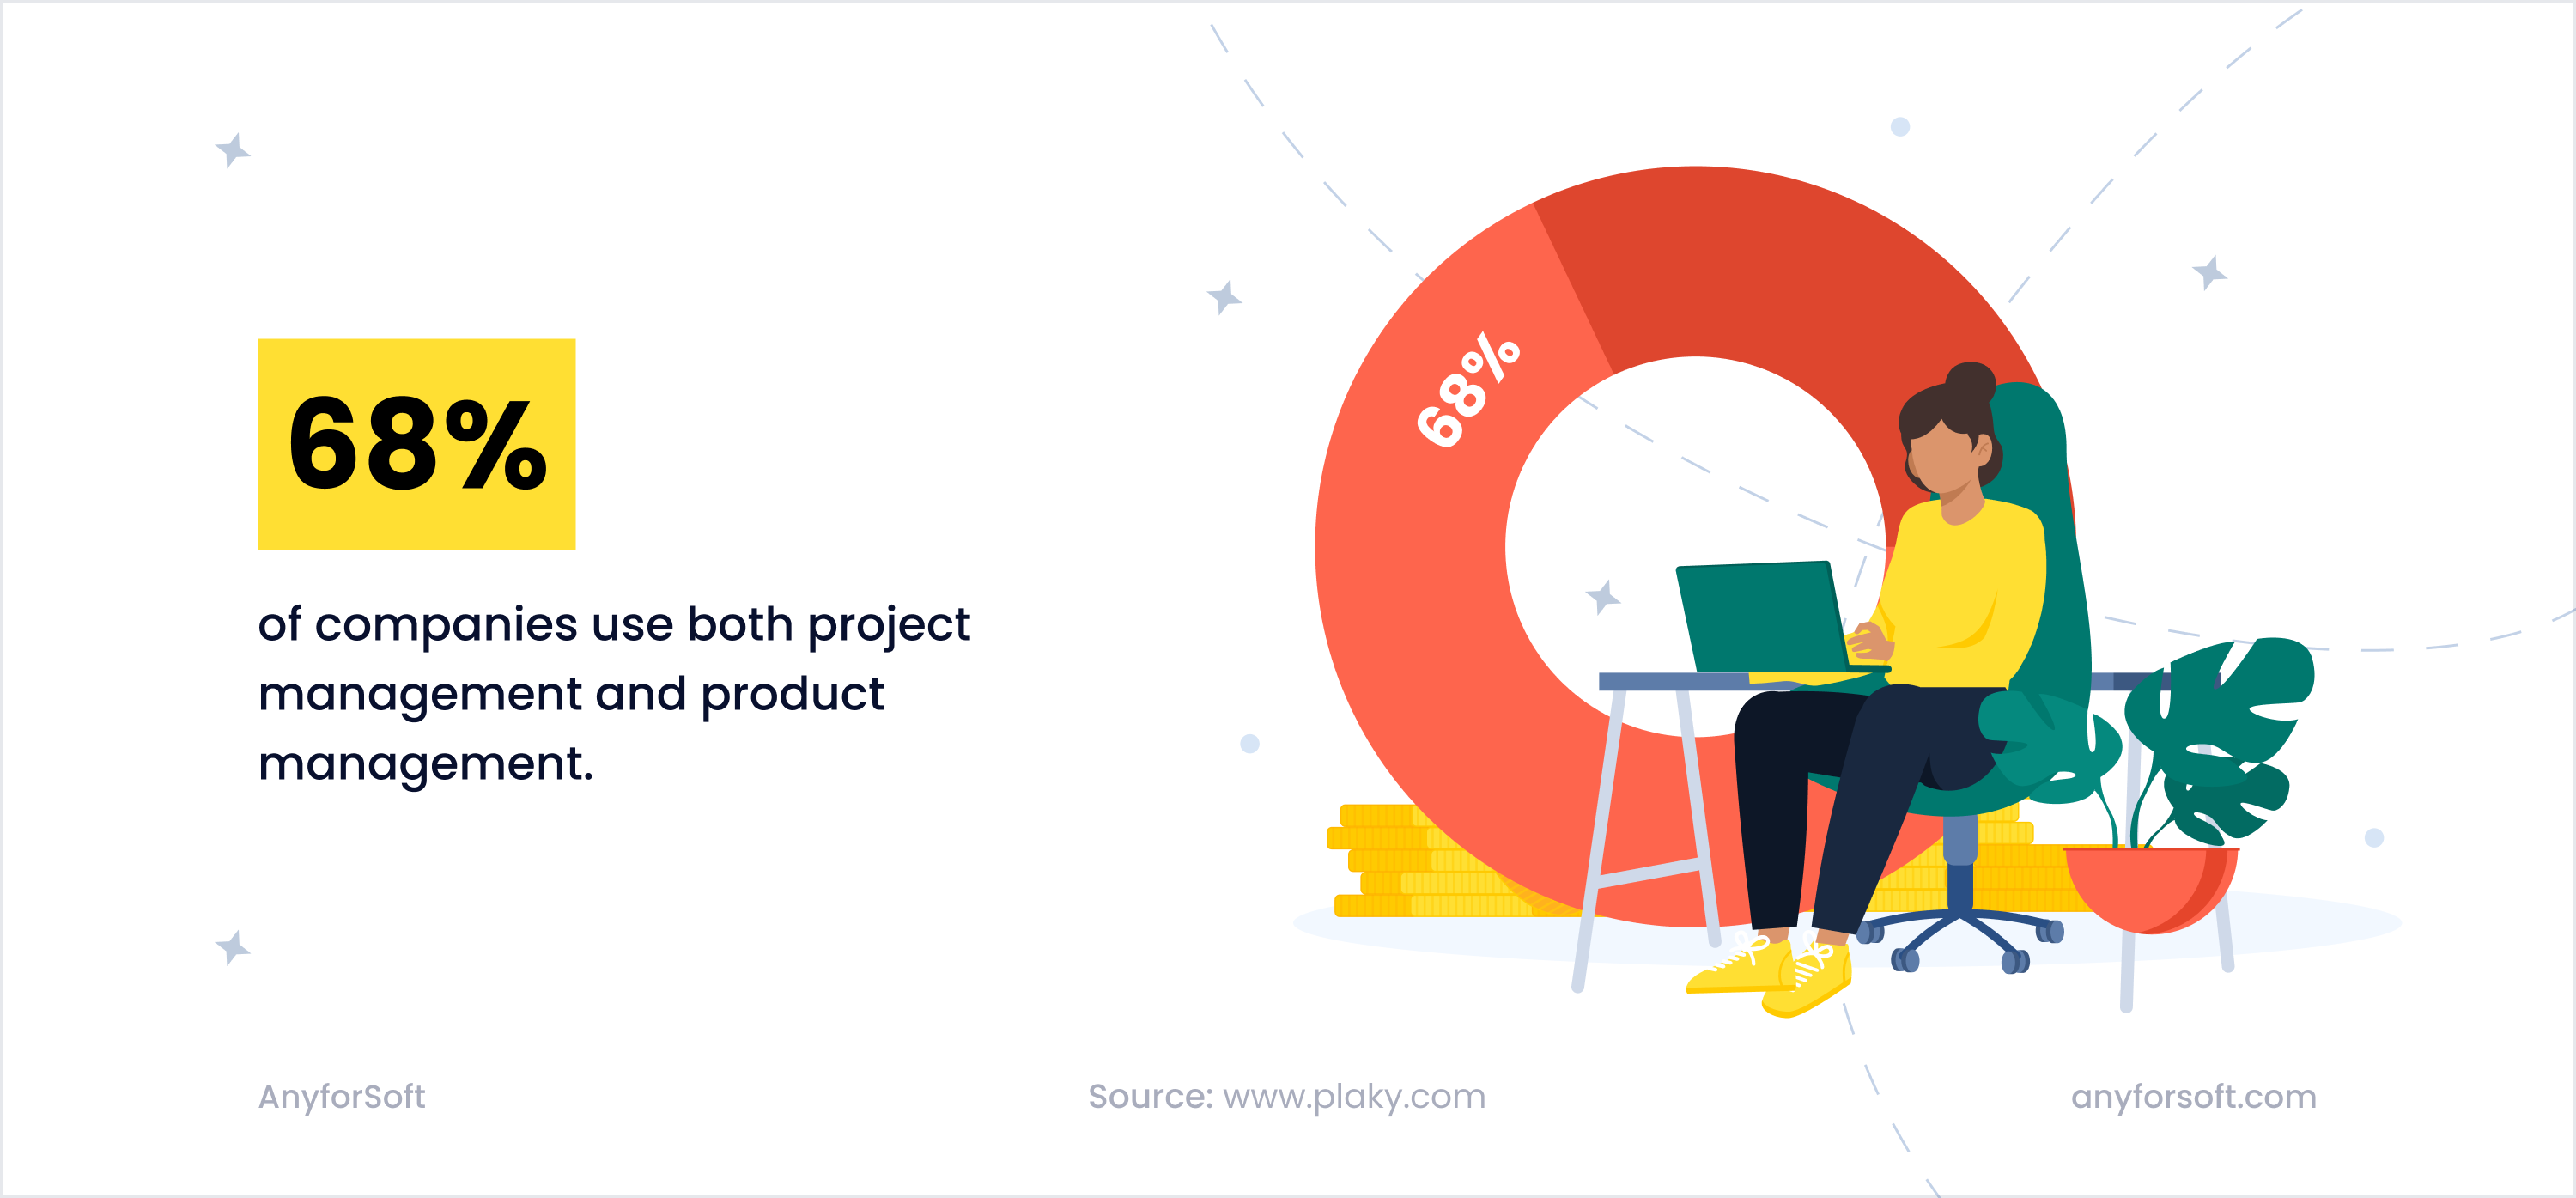 68% of companies use both project management and product management